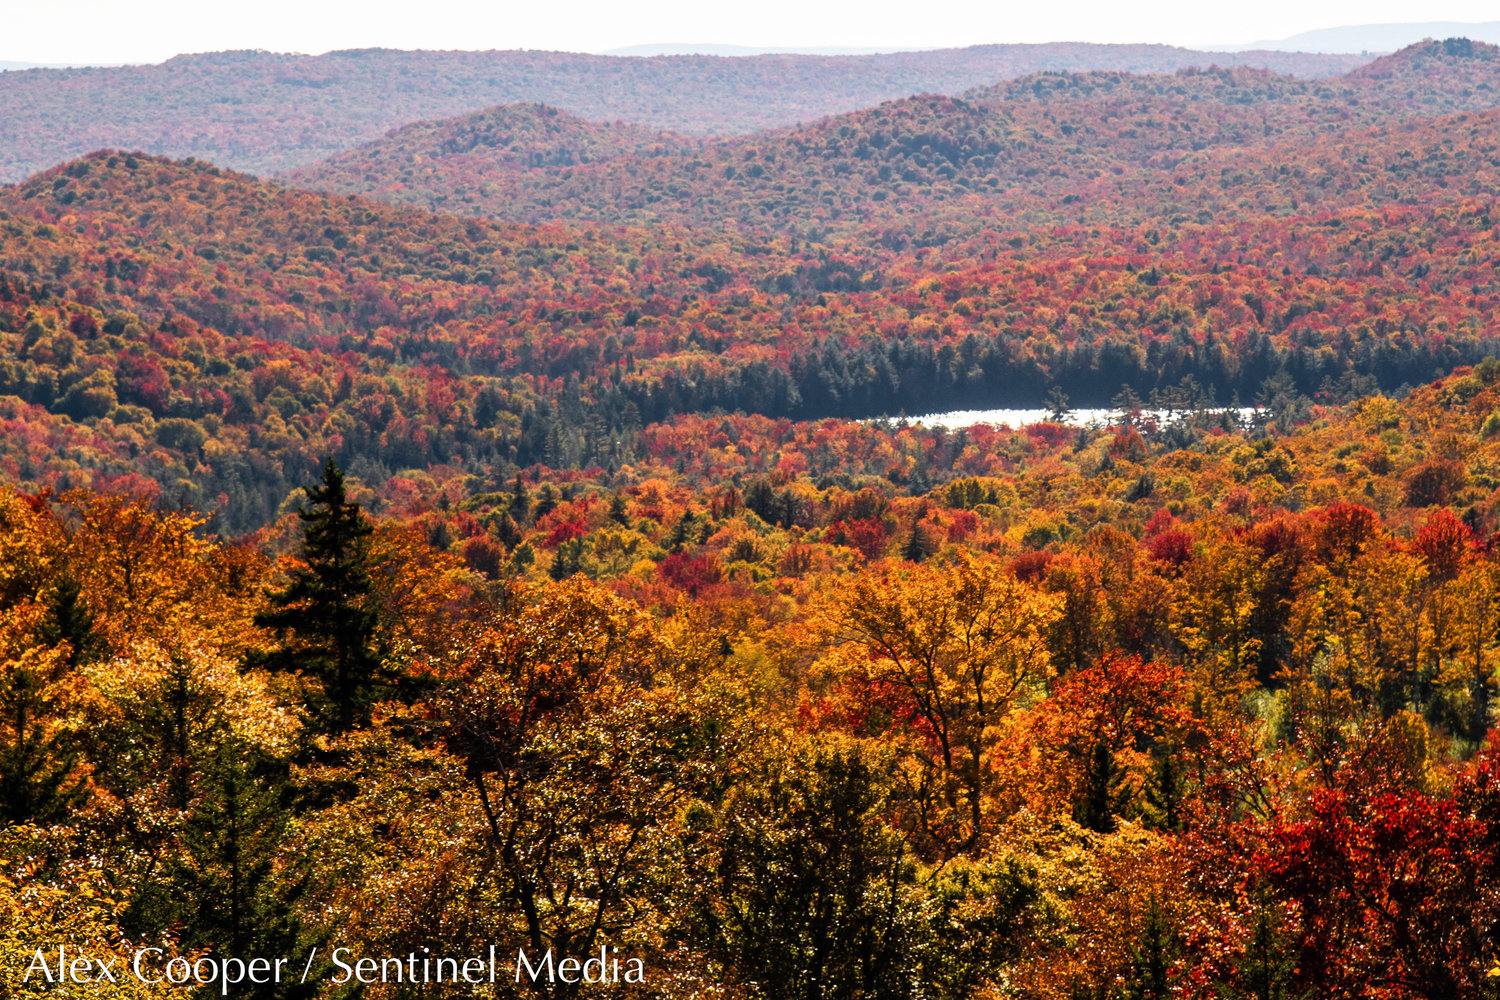 A view of peak fall foliage in the Adirondacks from the top of McCauley Mountain on Wednesday, Oct. 5 in Old Forge.